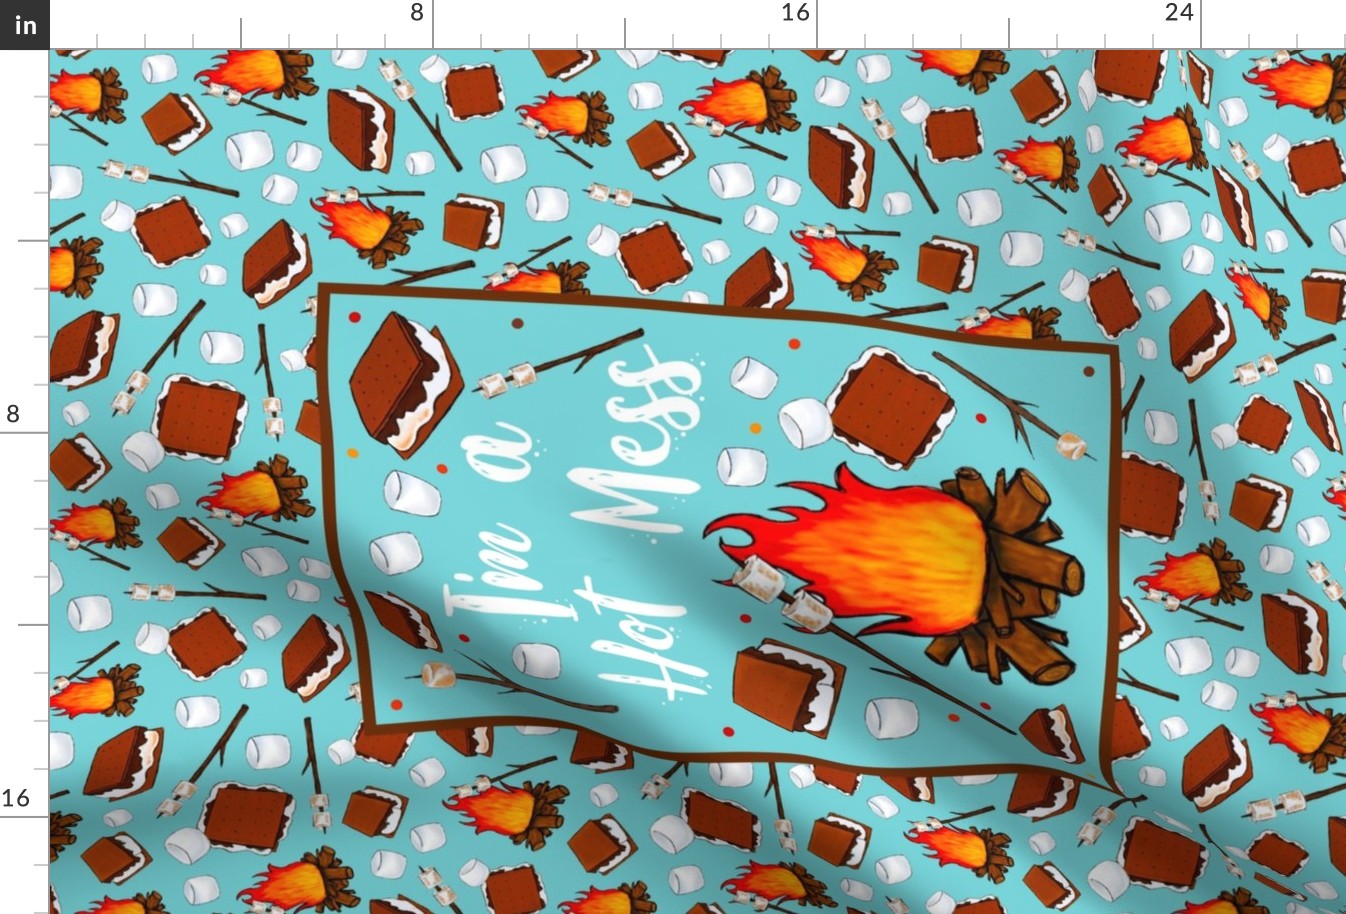 Large 27x18 Fat Quarter Panel I'm a Hot Mess Funny Campfire S'mores on Pool Blue for Wall Hanging or Tea Towel